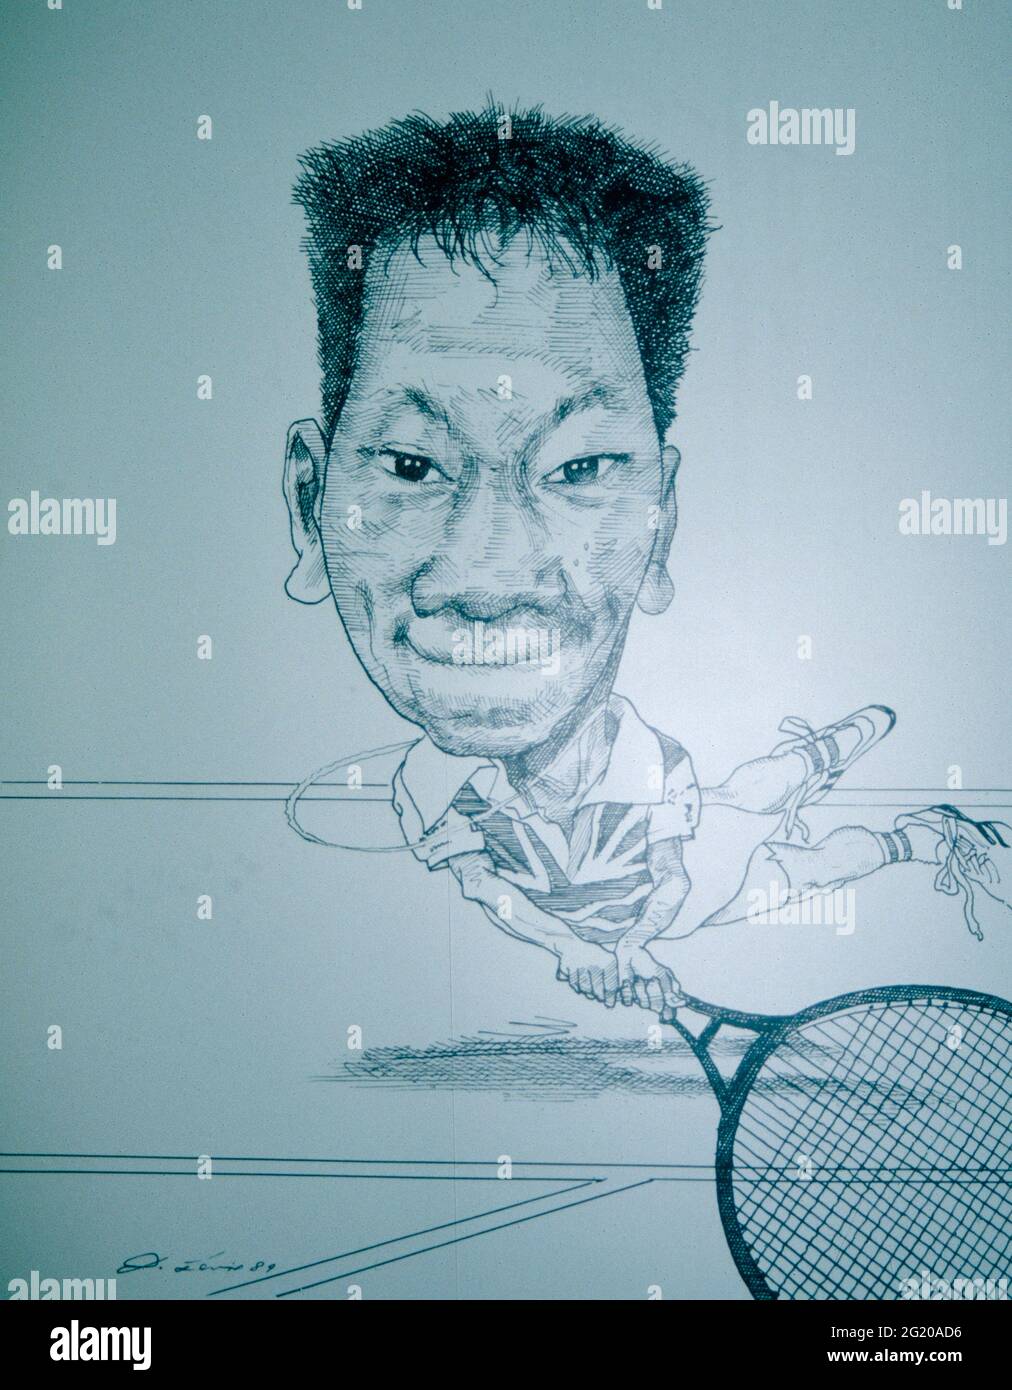 Caricature of unidentified tennis player, 1989 Stock Photo - Alamy